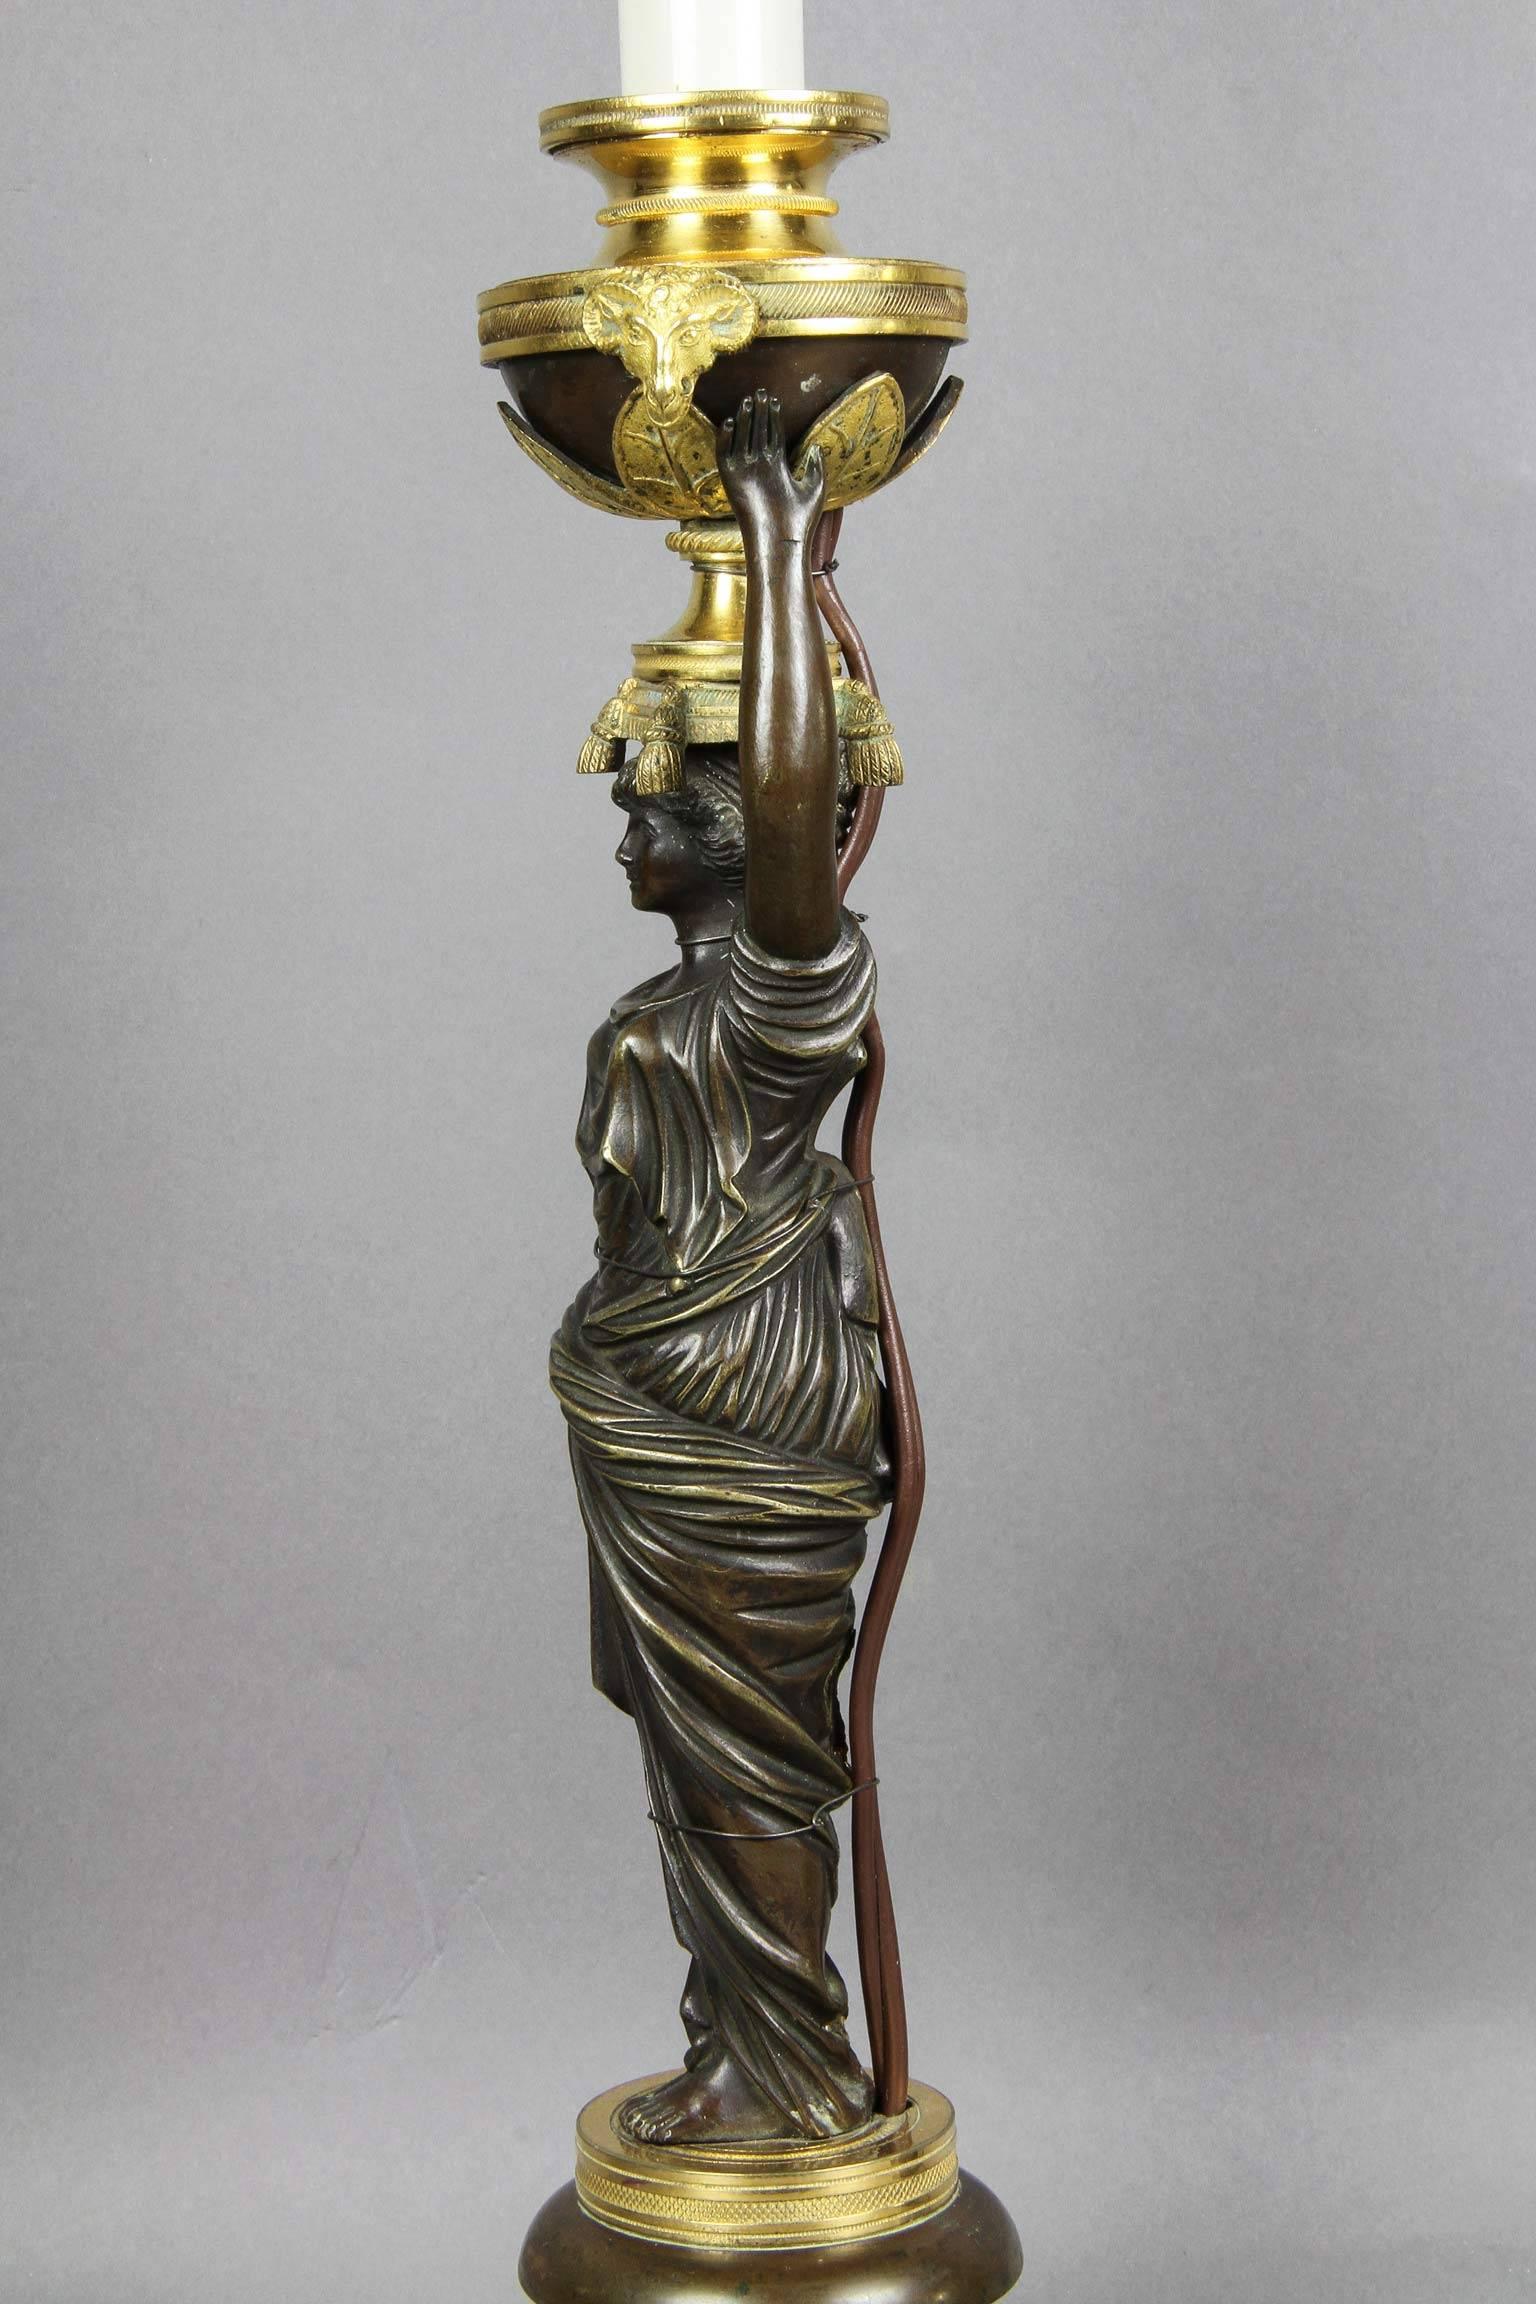 Originally one of a pair of figural candlesticks. Finely cast and chased with a candleholder now fitted with a two light modern fixture. The candleholder finely detailed with a pair of rams heads and leaves being held up by a classical maiden with